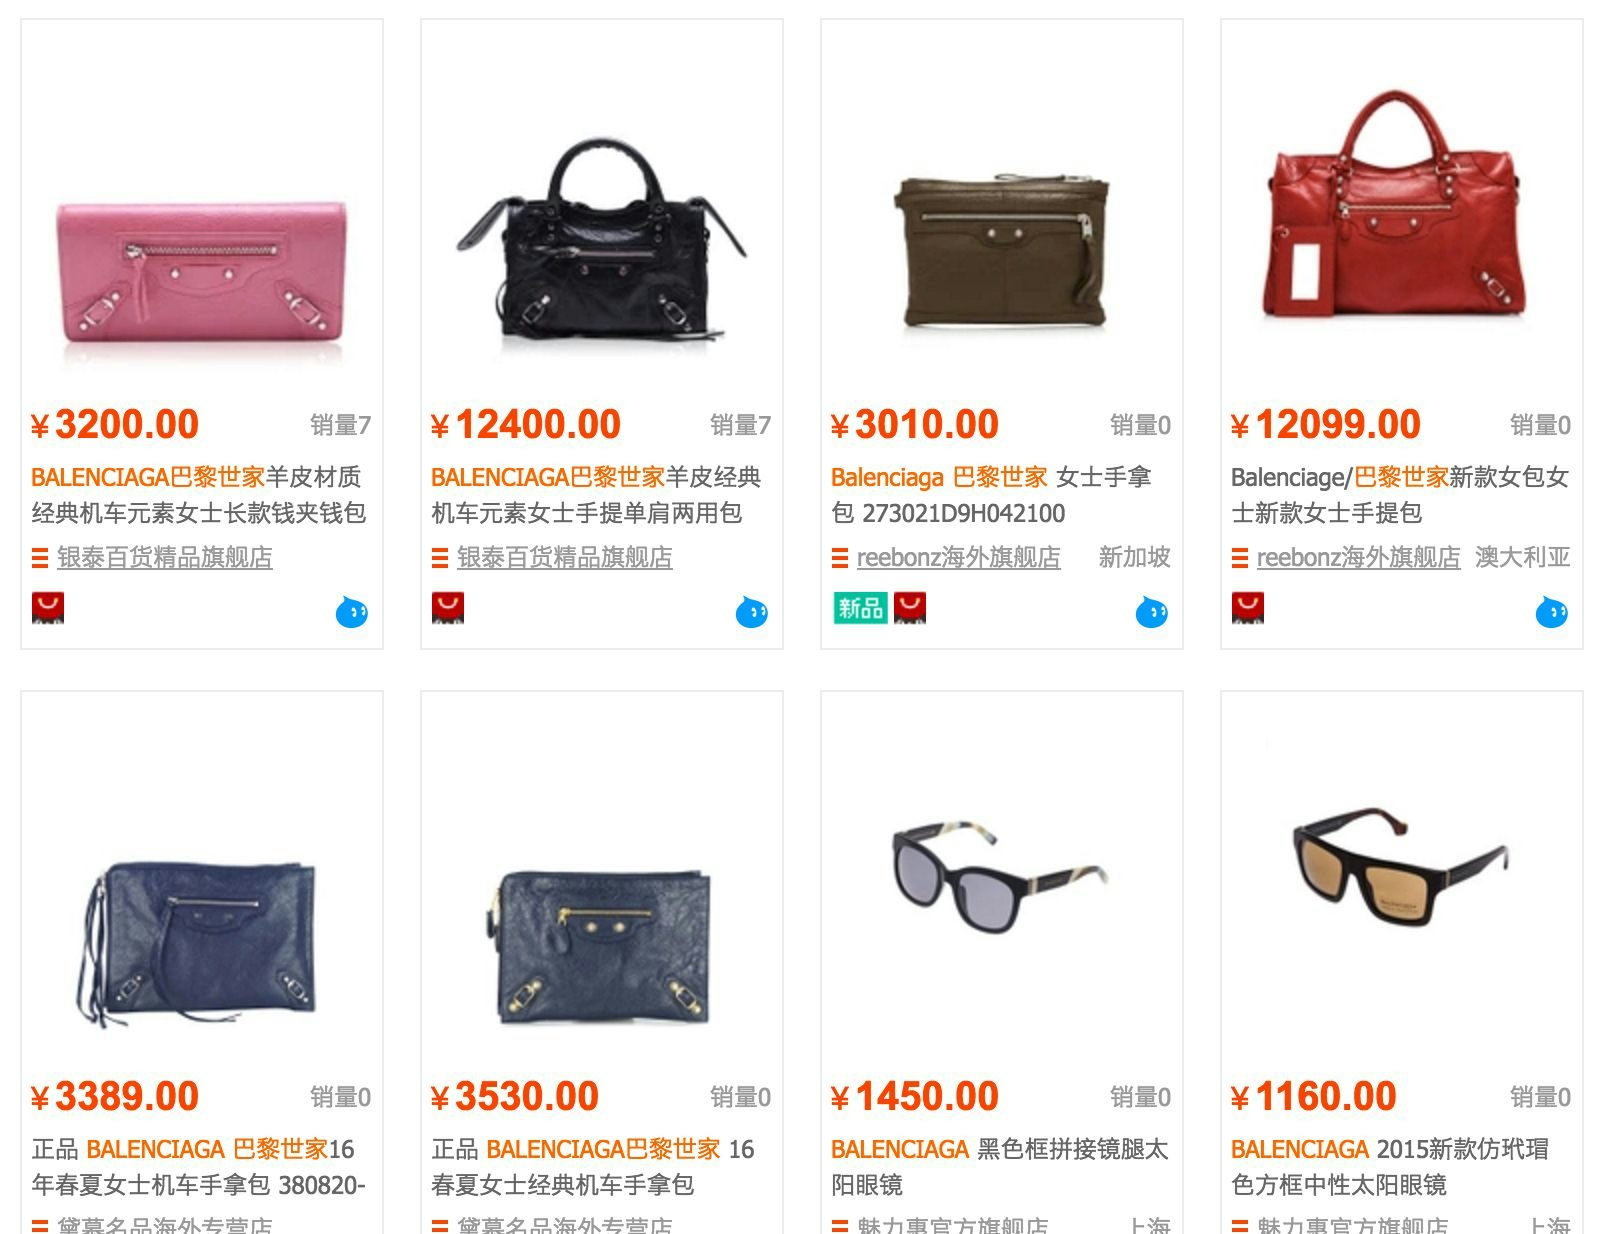 Alibaba Launches Counterfeit-Fighting Platform in Wake of Controversies